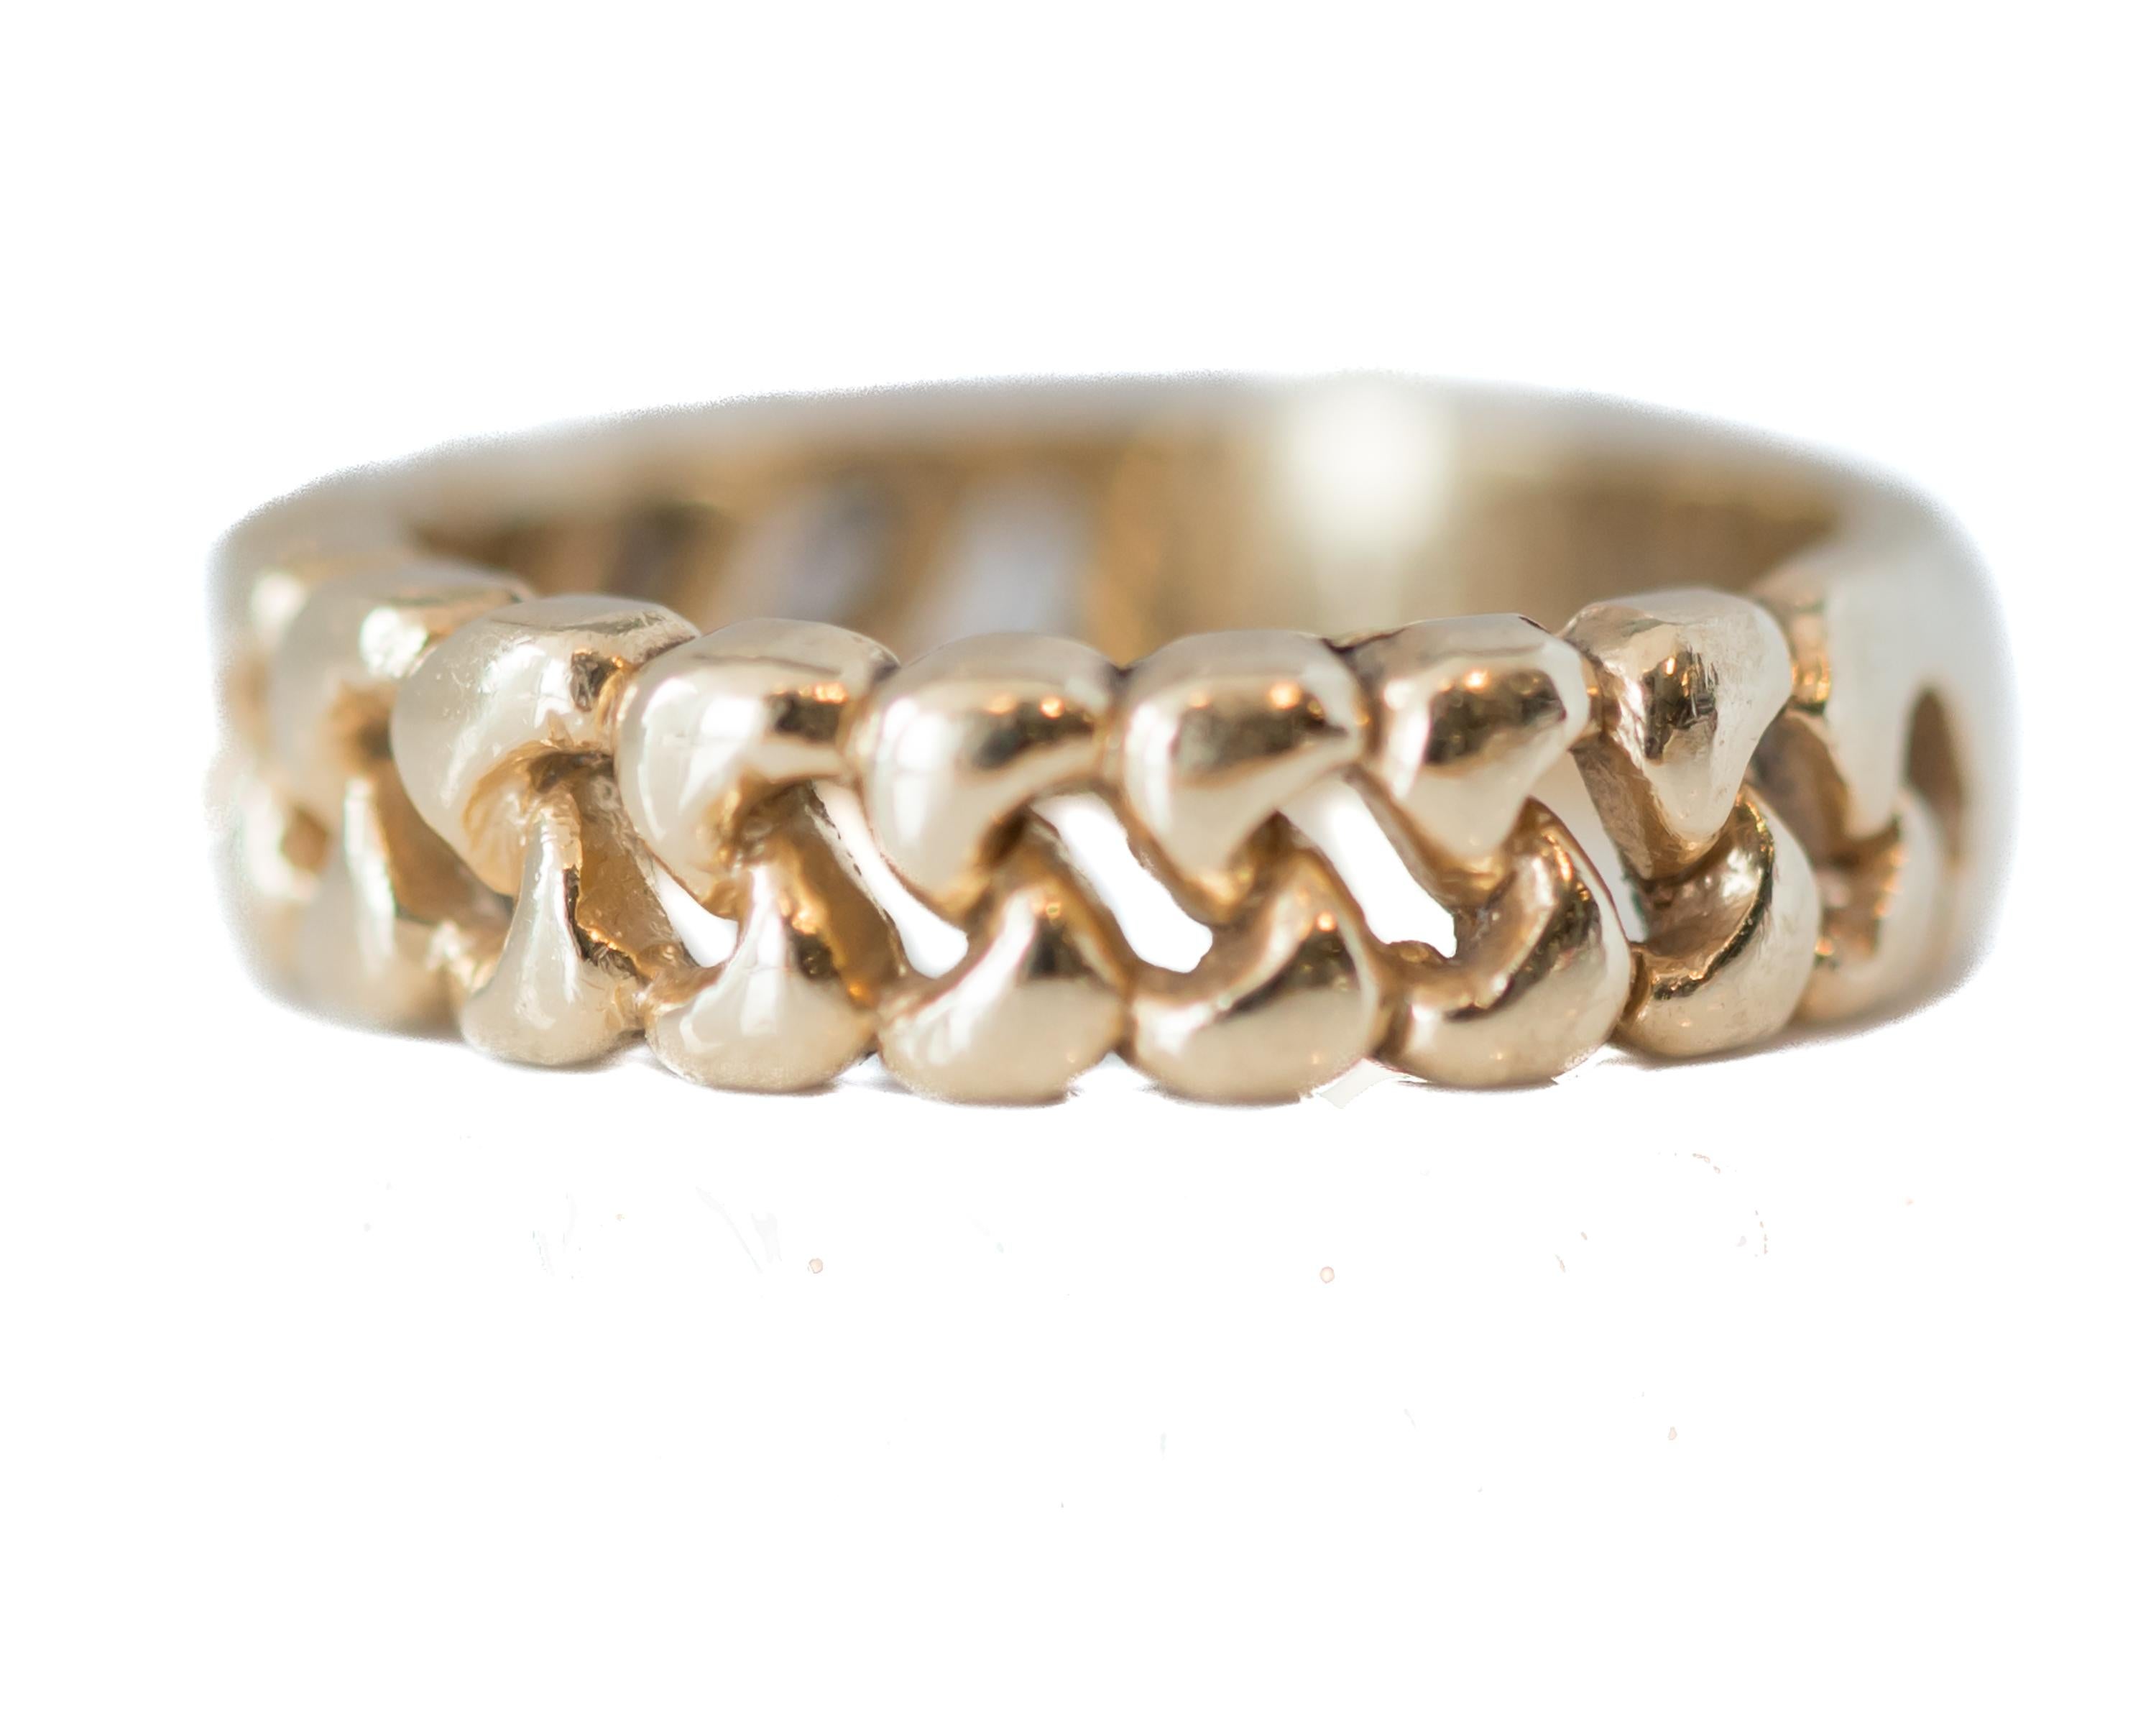 Gold Cuban Link Band Ring - 14 Karat Yellow Gold

Features:
Rich 14 karat Yellow Gold
Cuban Link Pattern 3/4 way around
Smooth center back
Inner shank engraved 1 NOV 1975
4.5 millimeters wide
Finger to top of ring 2 millimeters
Ring fits a size